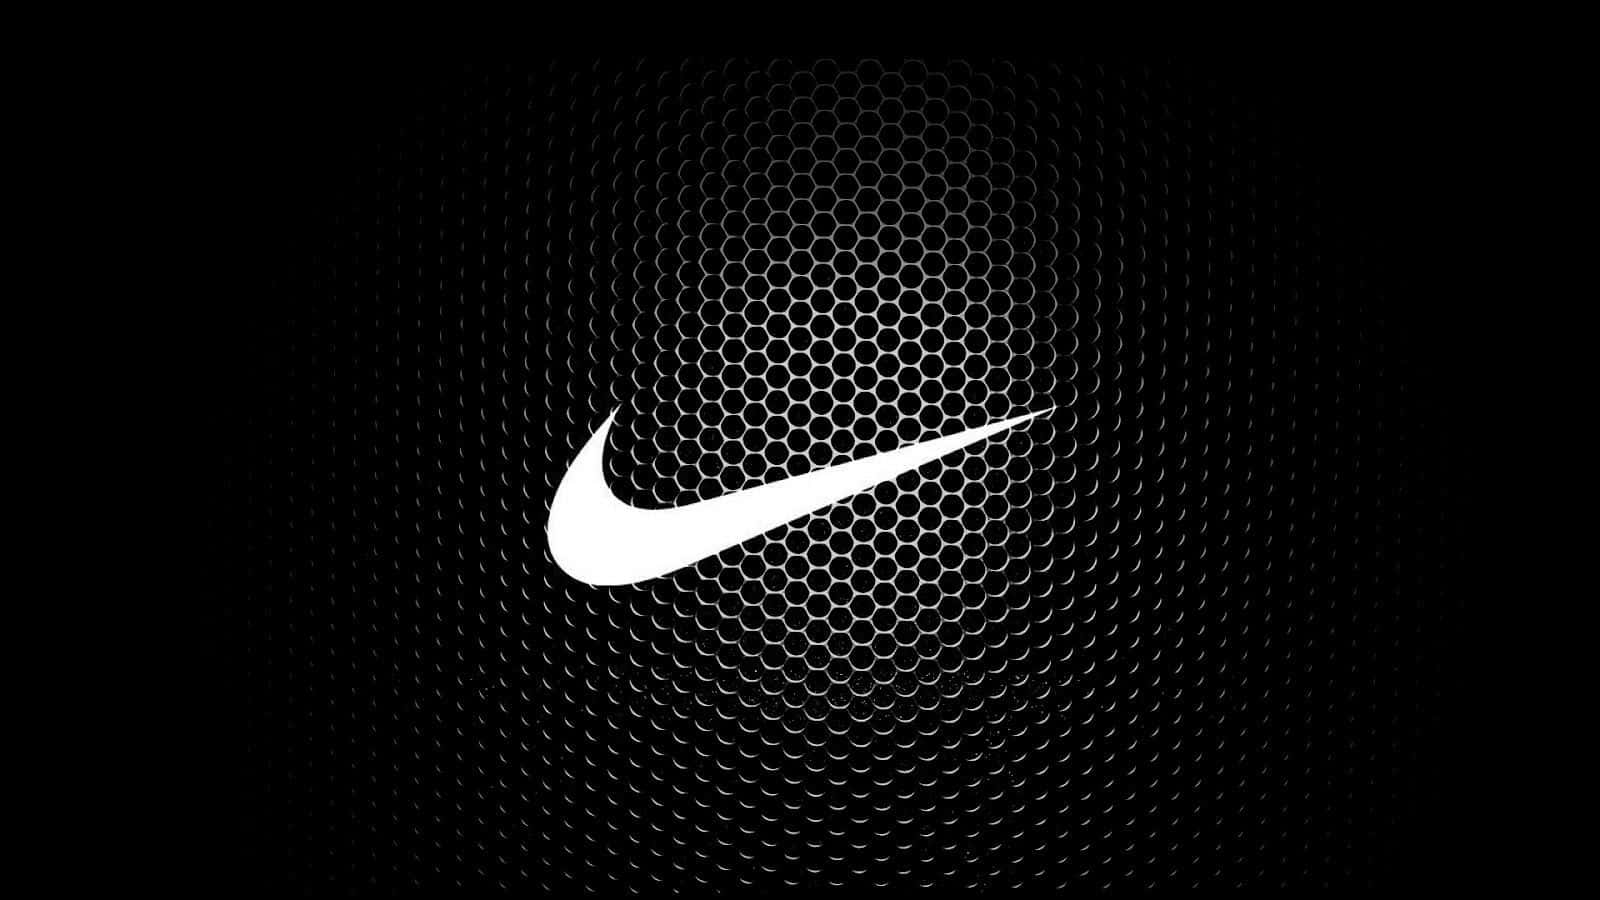 Stylish Aesthetic Nike Wallpaper 4K for Mobile Devices